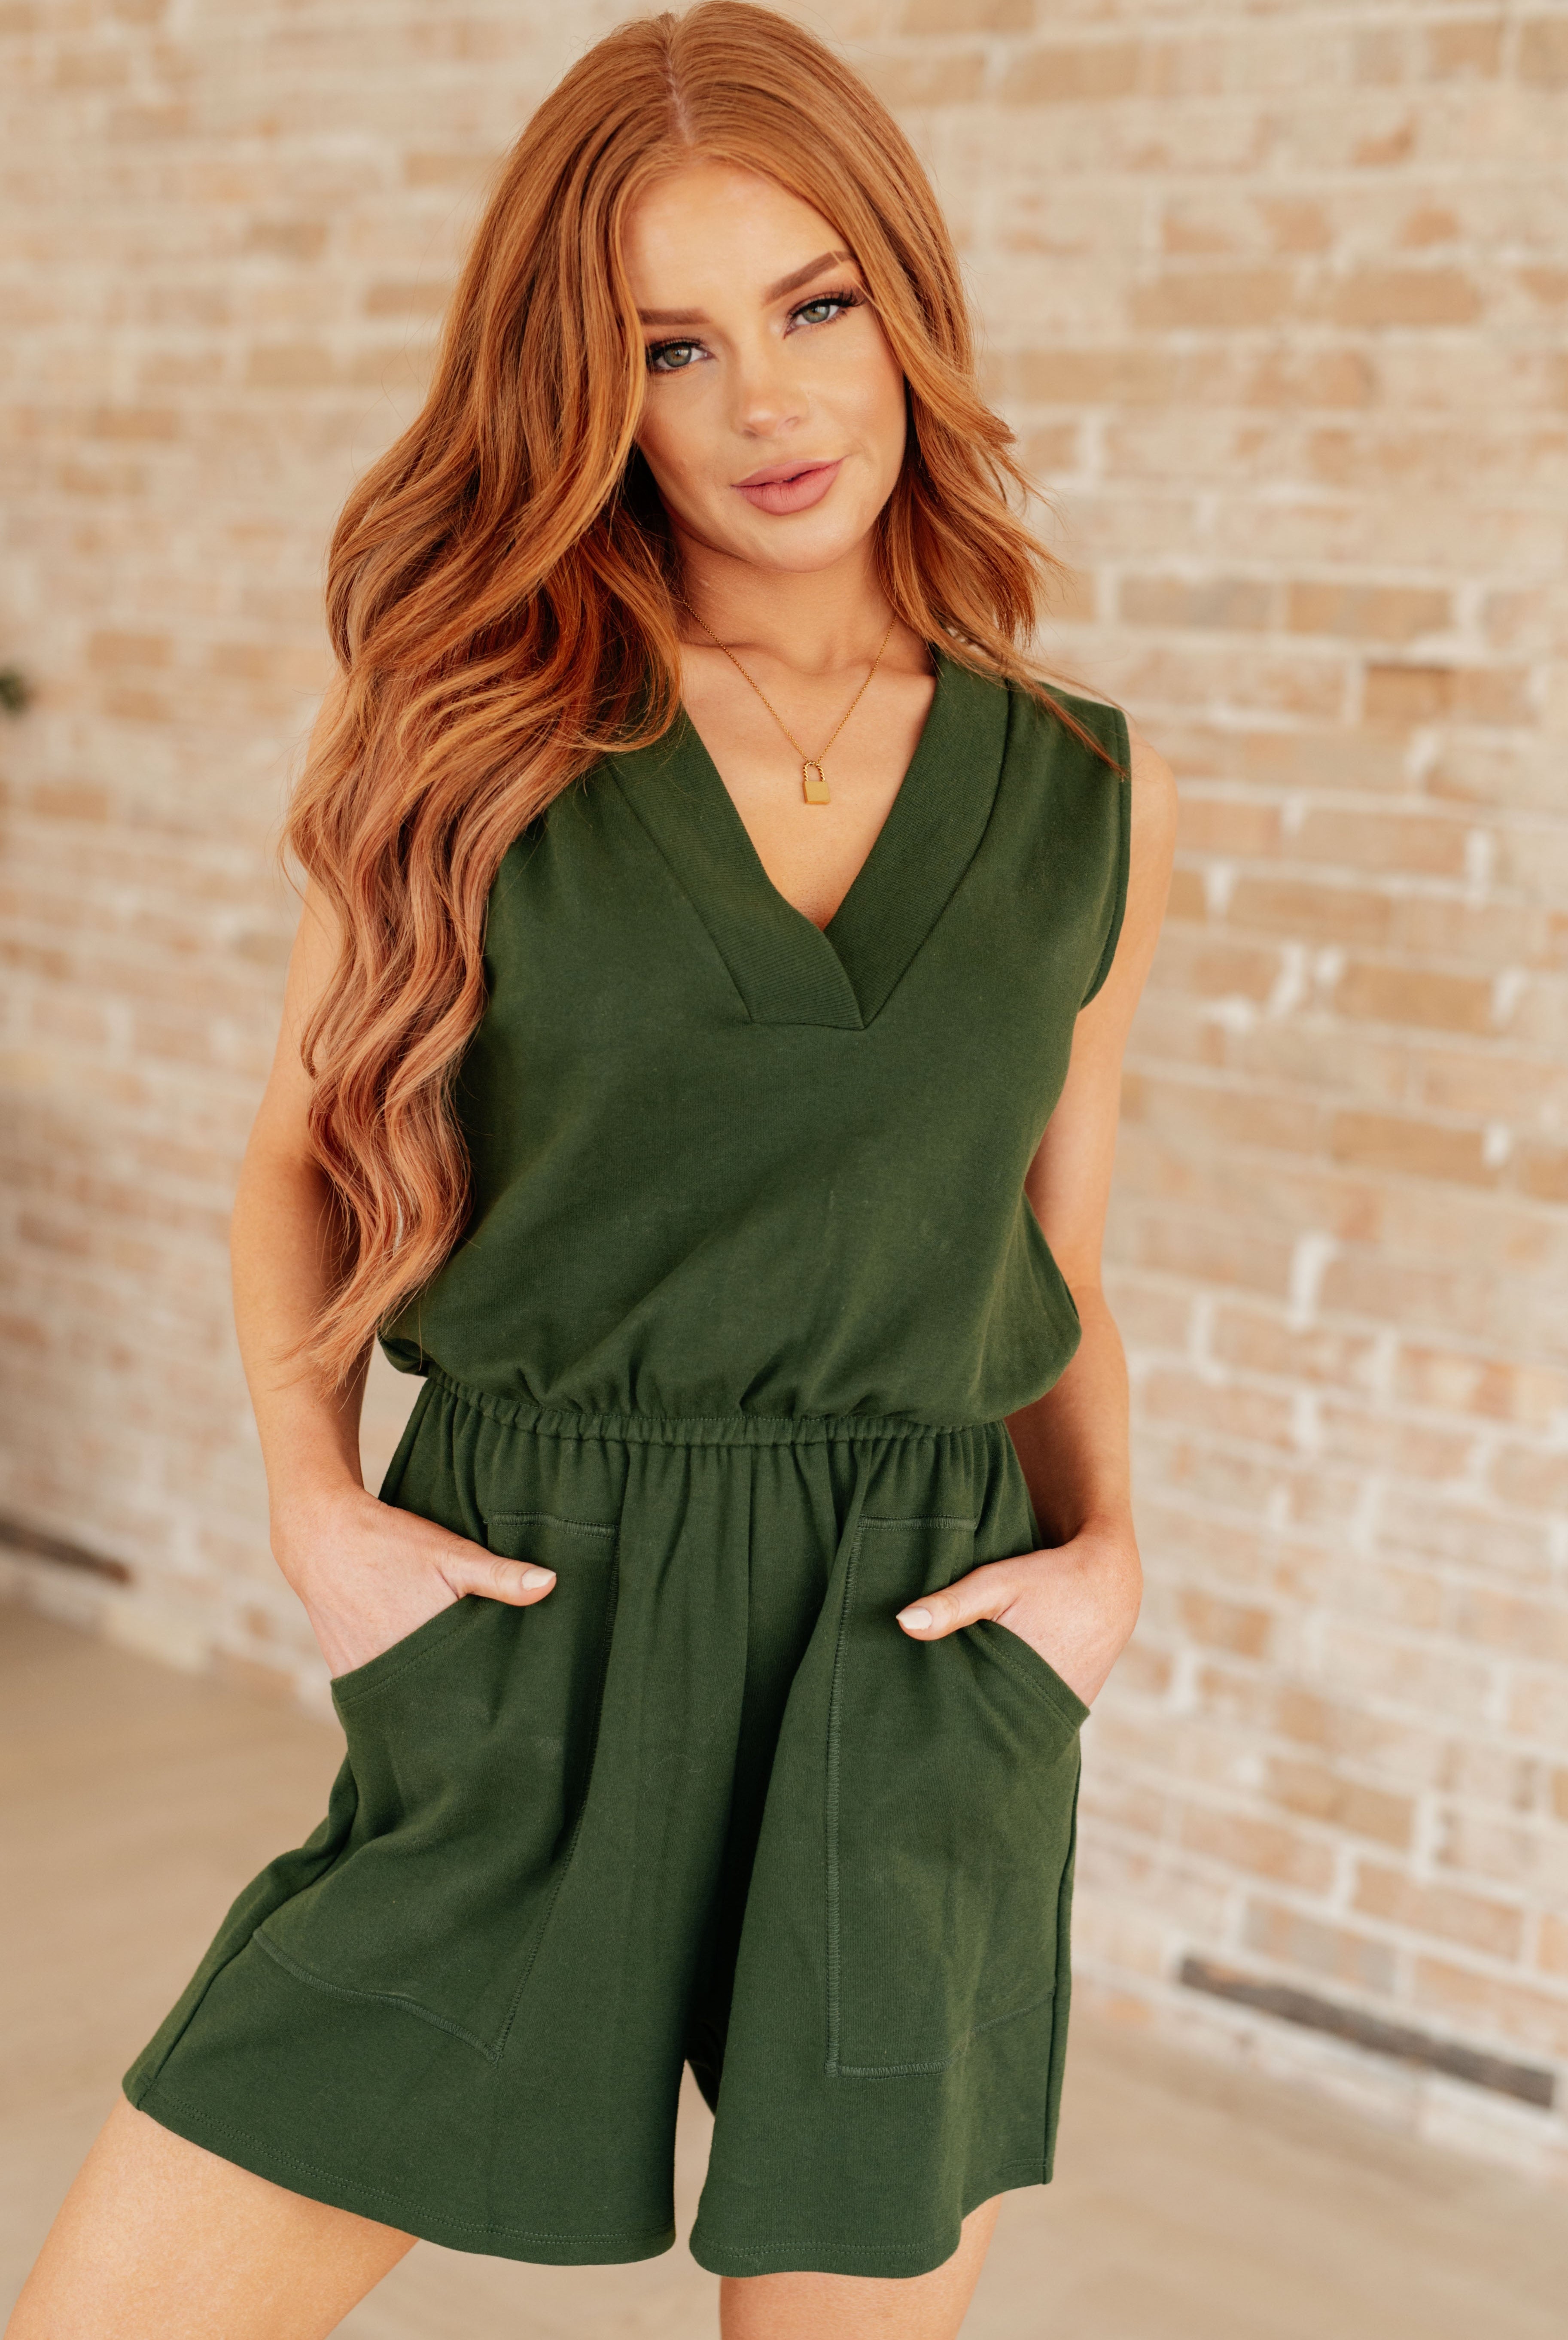 Sleeveless V-Neck Romper in Army Green-Rompers-Ave Shops-Urban Threadz Boutique, Women's Fashion Boutique in Saugatuck, MI